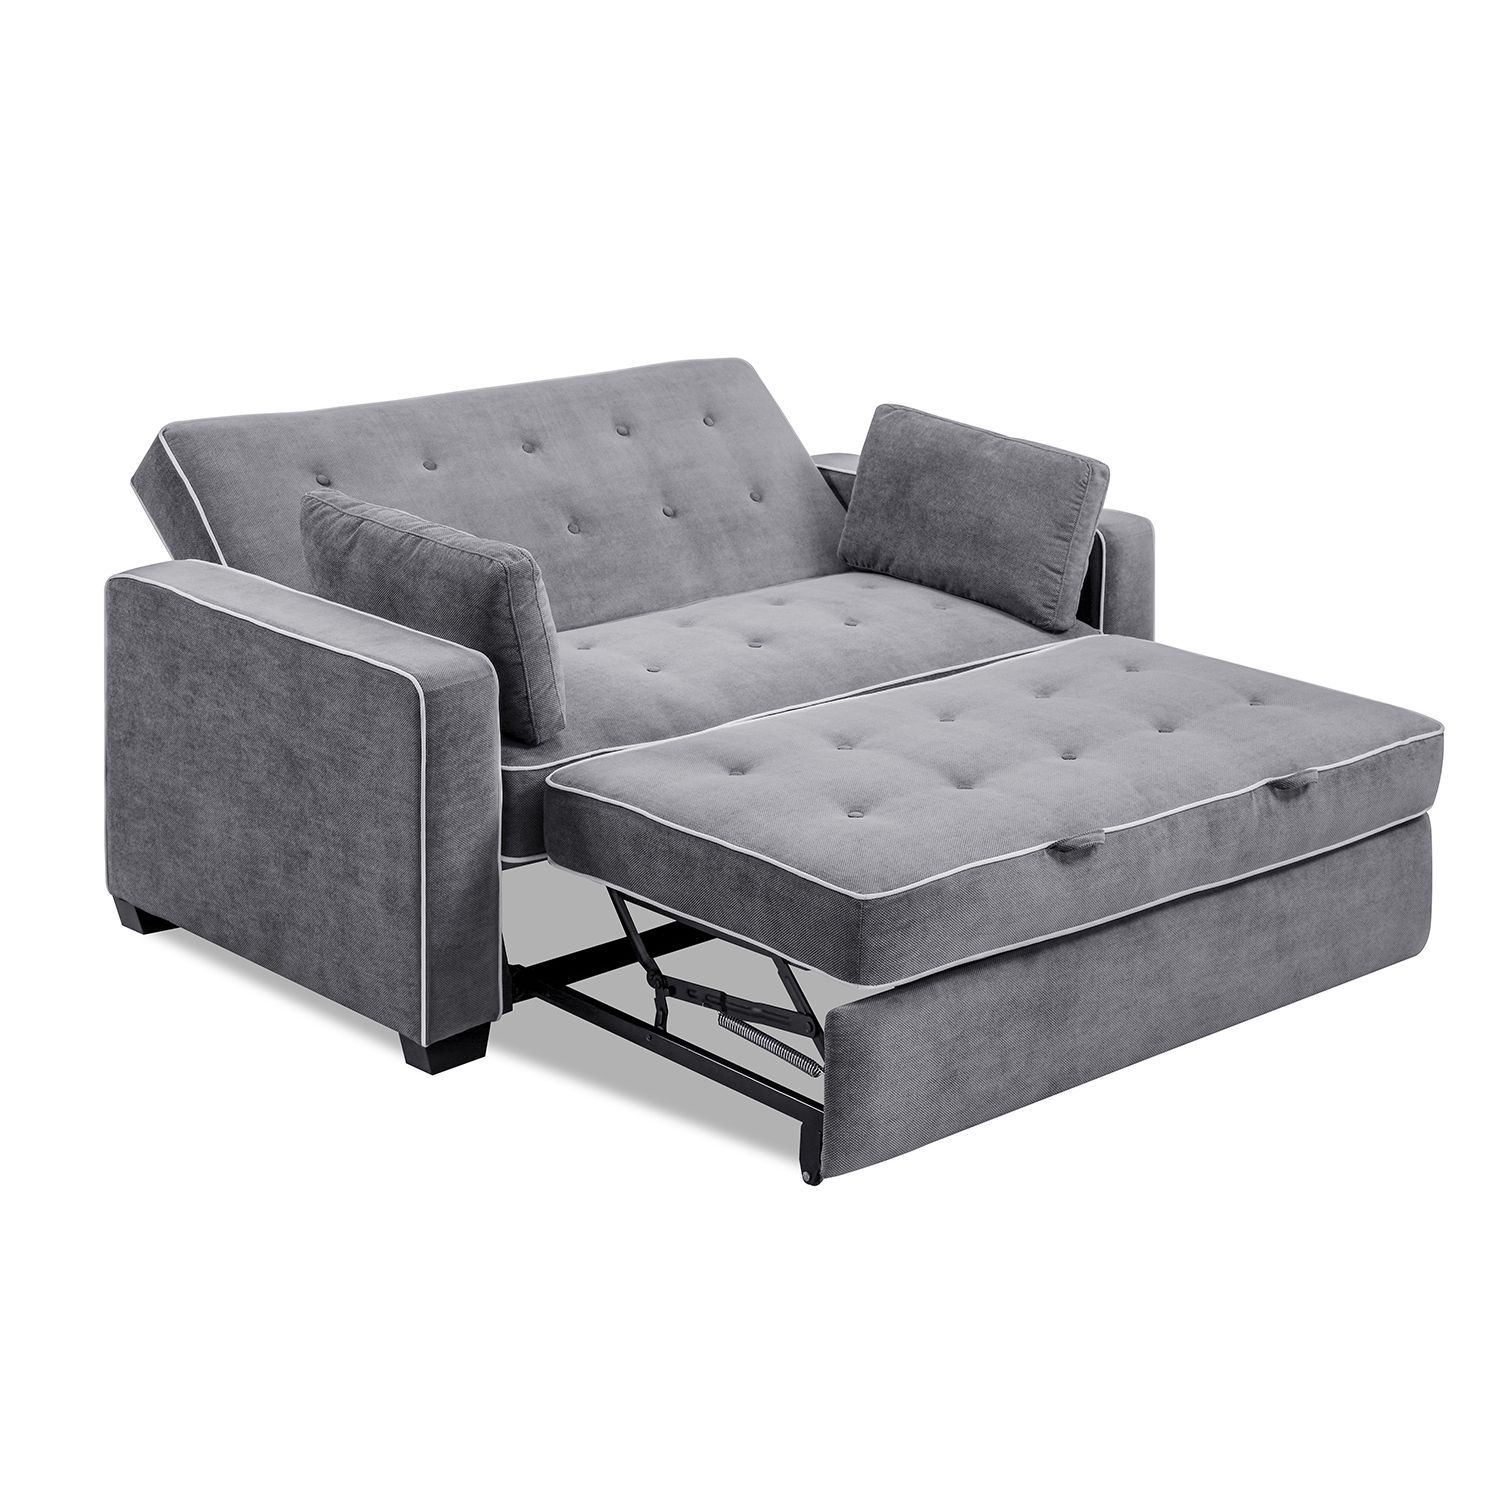 Serta Augustus Convertible Queen Sofa Bed | Sofa Bed Queen, Sofa Bed Intended For 3 In 1 Gray Pull Out Sleeper Sofas (Gallery 13 of 20)